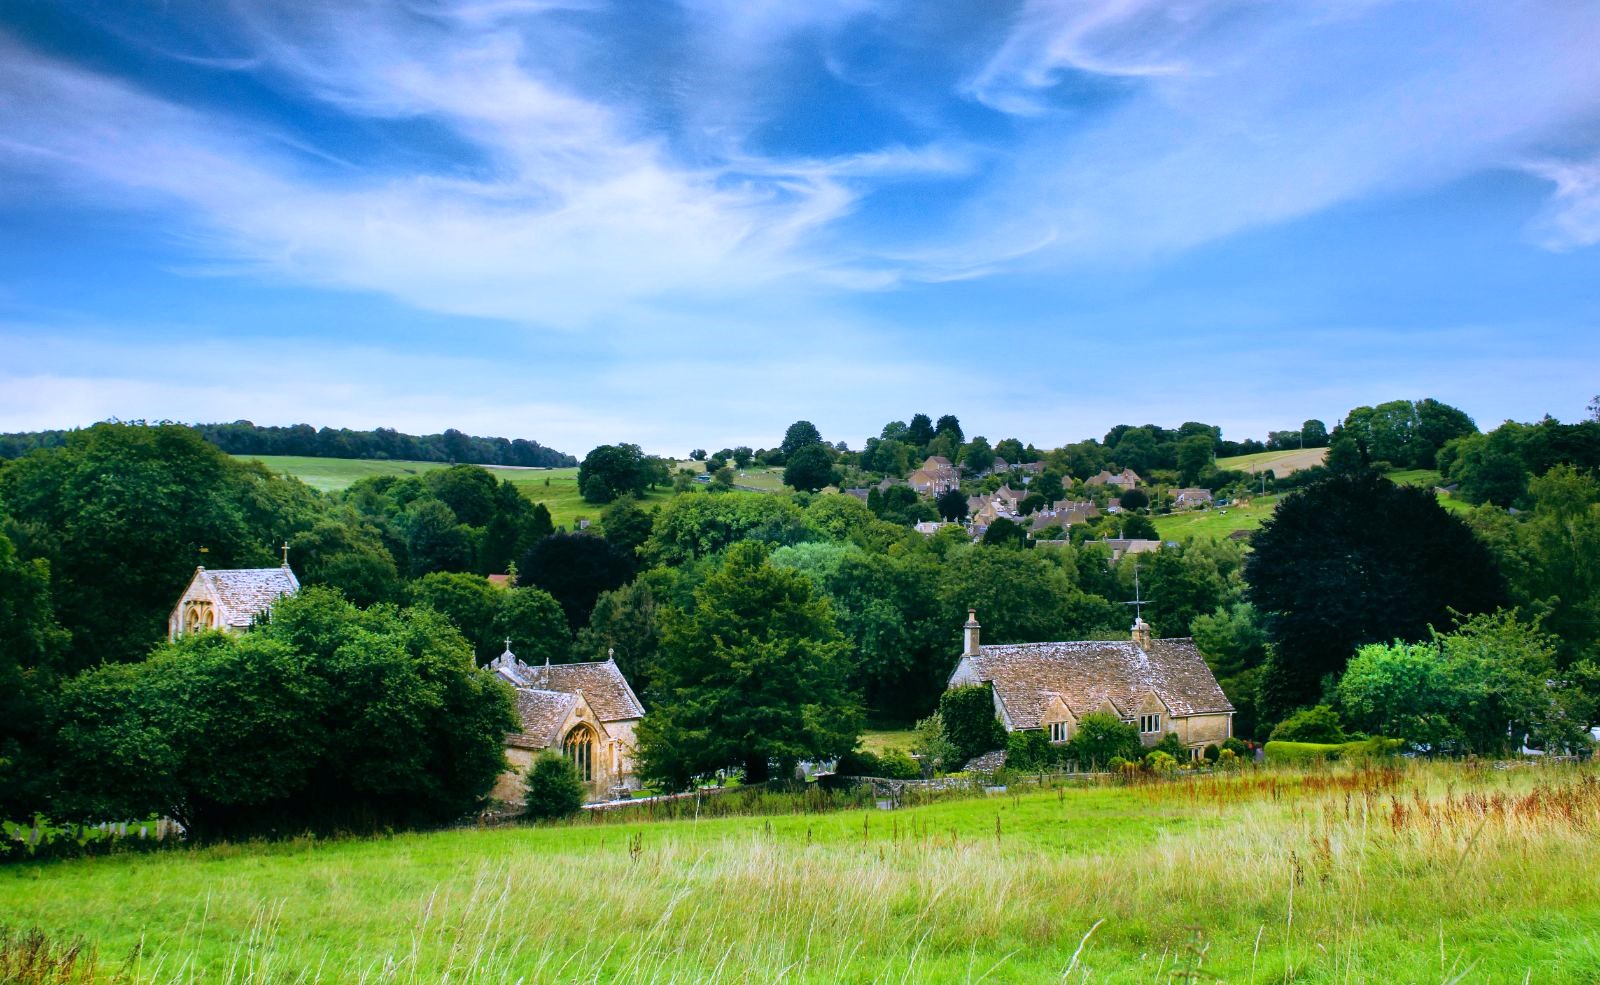 Cottages amongst the fields in The Cotswolds, United Kingdom